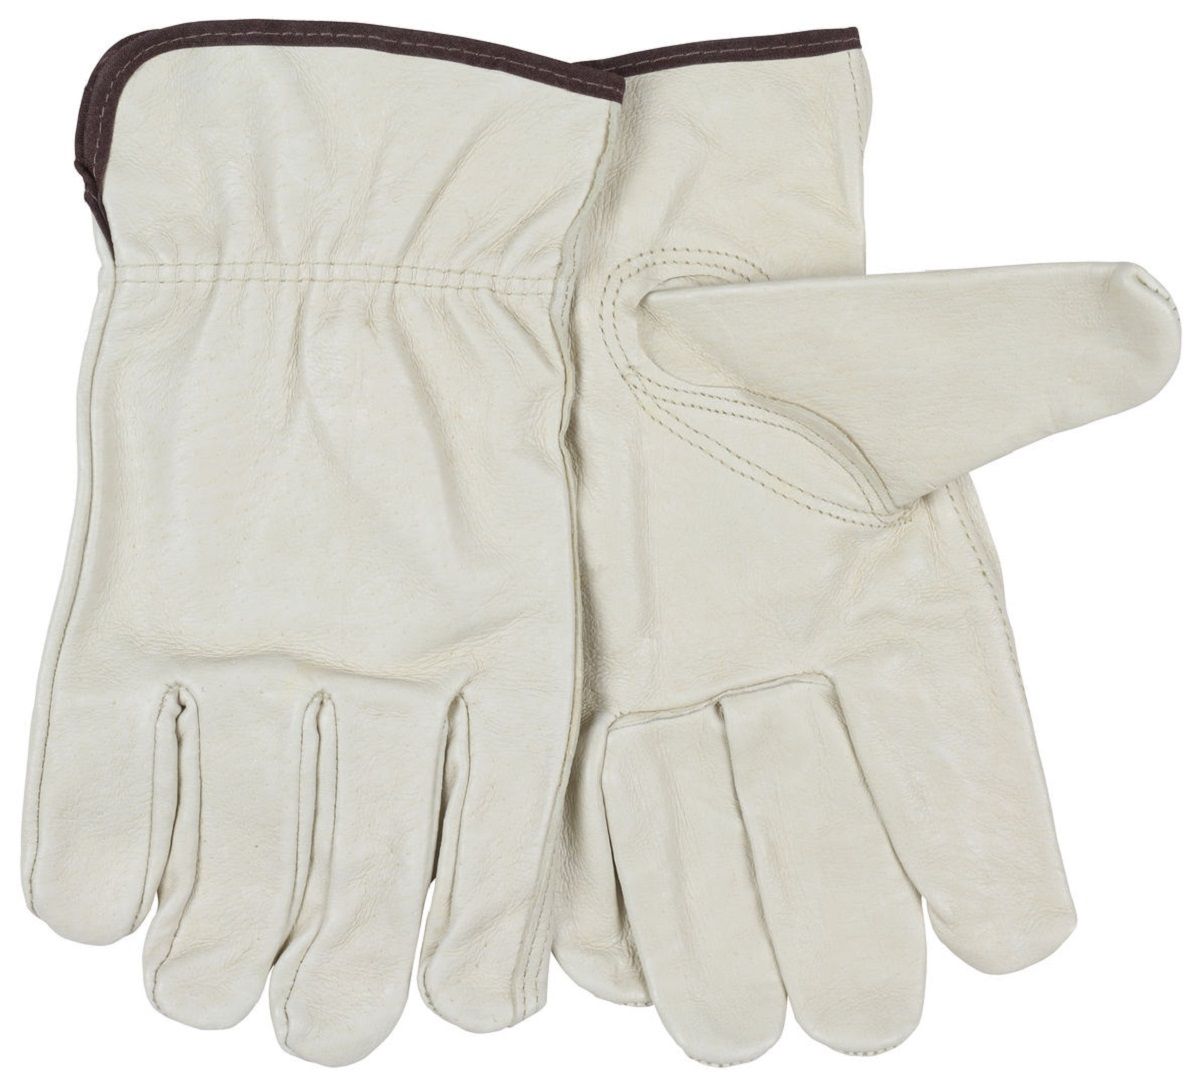 MCR Safety 3401 Unlined Grain Pigskin Leather, Drivers Work Gloves, Beige, Box of 12 Pairs